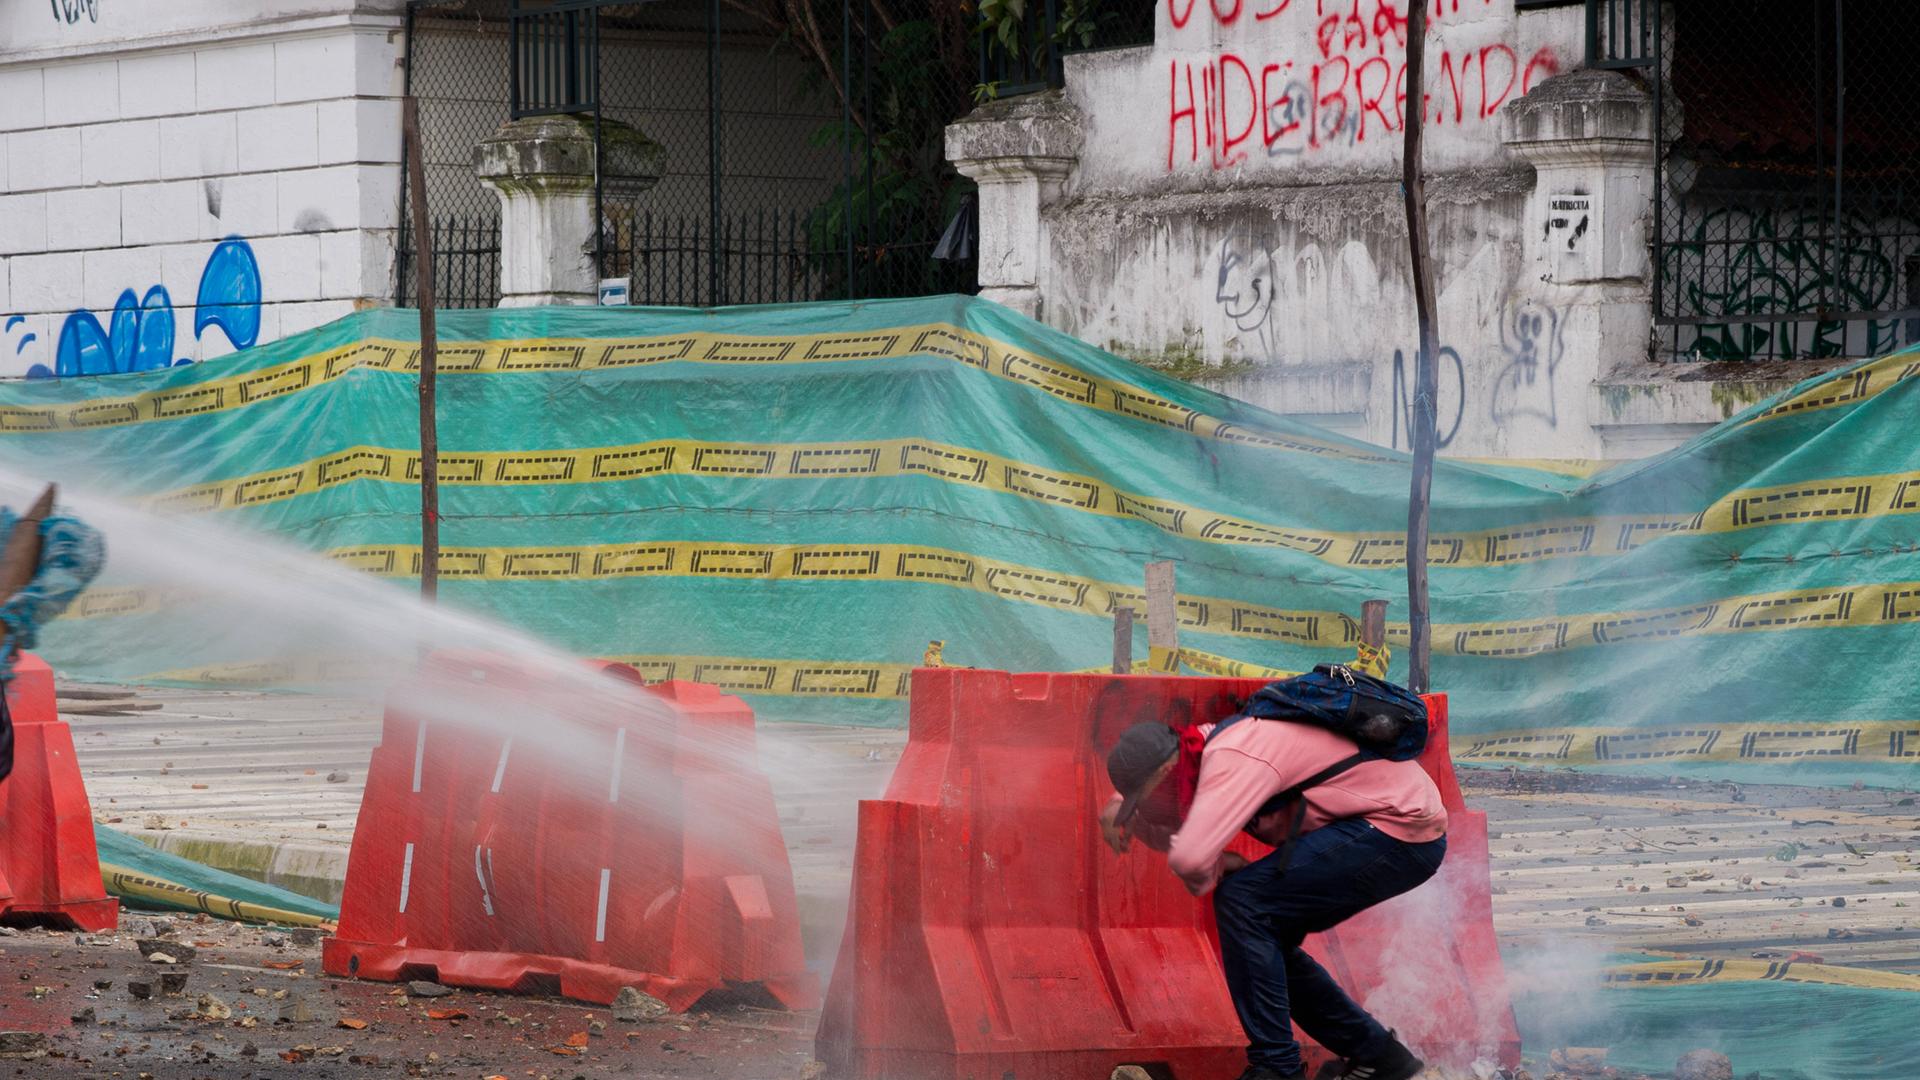 Demonstration In Bogota, Colombia Erupts In Clashes A demonstrator takes cover behind a road barrier as it s hit by a wa